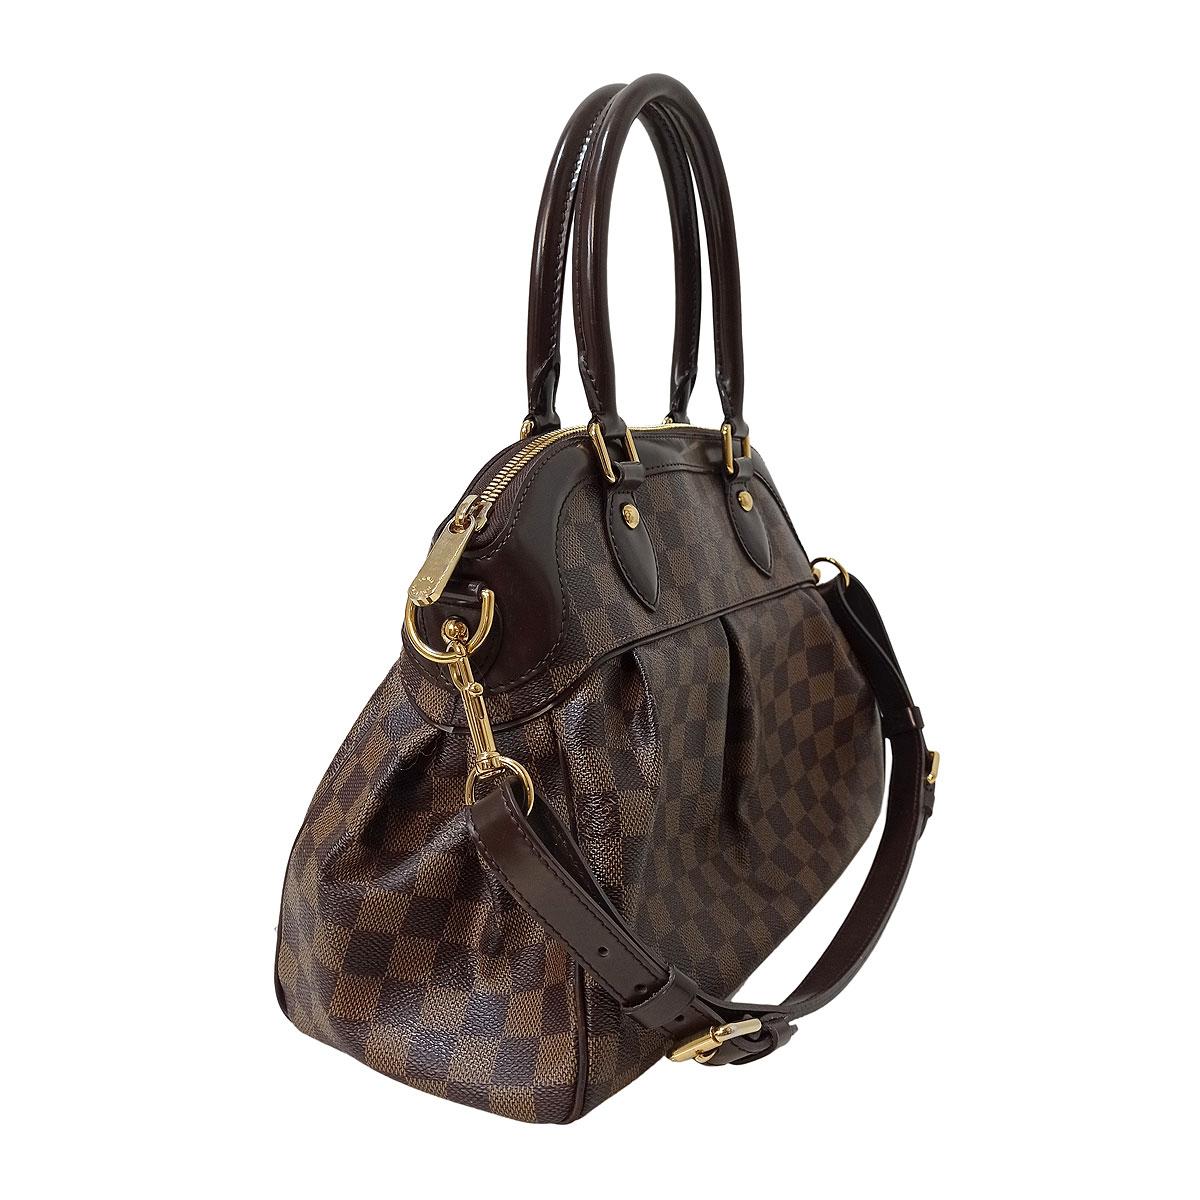 Iconic LV bag
Year 2009
Damier
Leather
Brown color
Golden metal
Double handle, can be carried on shoulder too
Zip closure
Internal pocket and phone holder
Red textile internal
Cm 34 x 25 x 14,5 (13,3 x 9,84 x 5,7 inches)
Worldwide express shipping